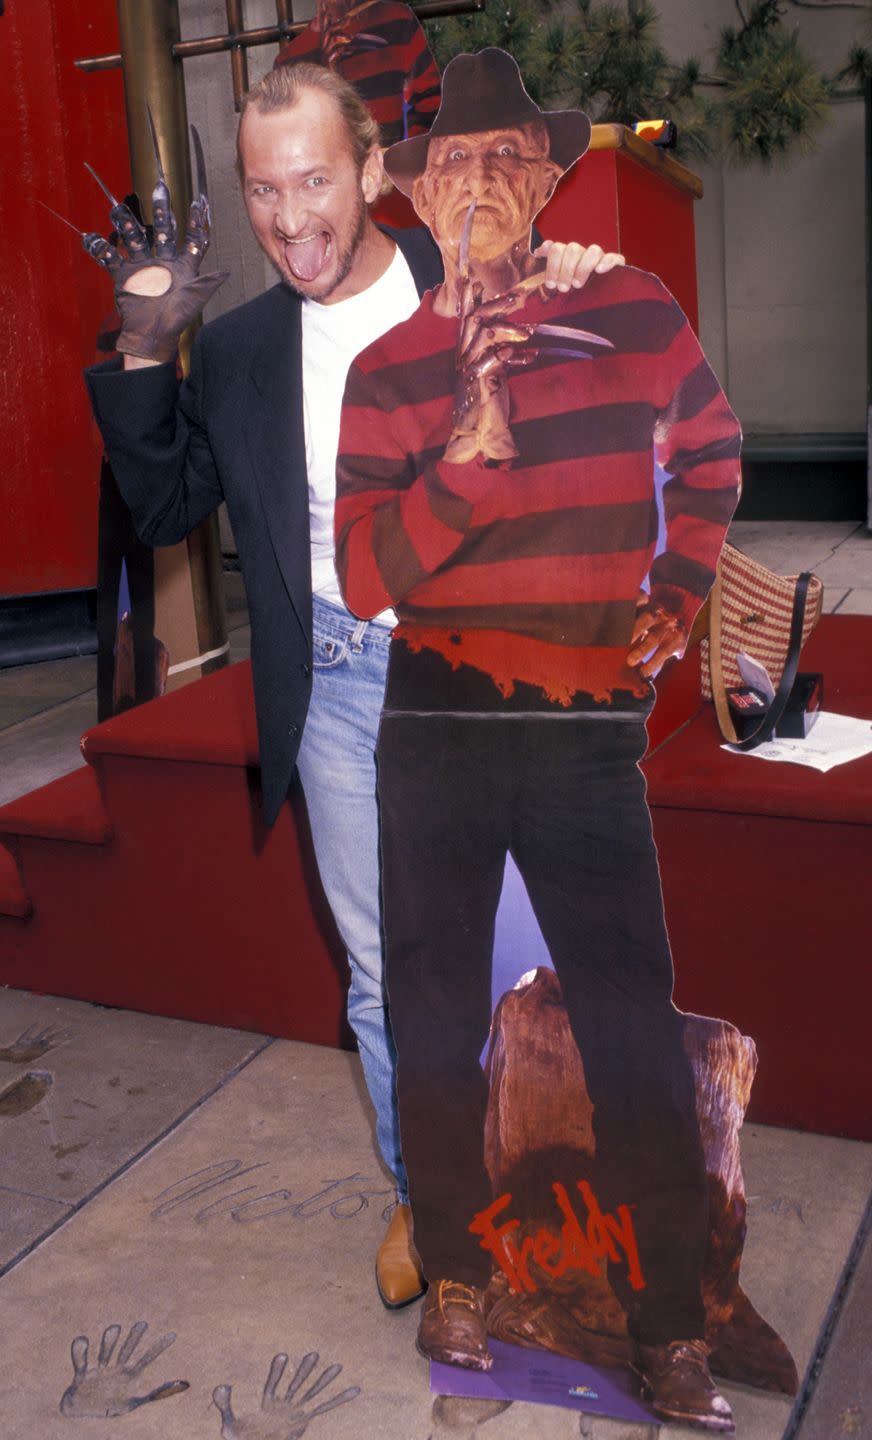 <p>Not only did Englund don Freddy Krueger's glove in the original <em>A Nightmare on Elm Street</em> in 1984, but he also portrayed the infamous horror villain in all seven sequels as well as the short-lived <em>Elm Street </em>TV series <em>Freddy's Nightmares</em> from 1988-1990.</p>